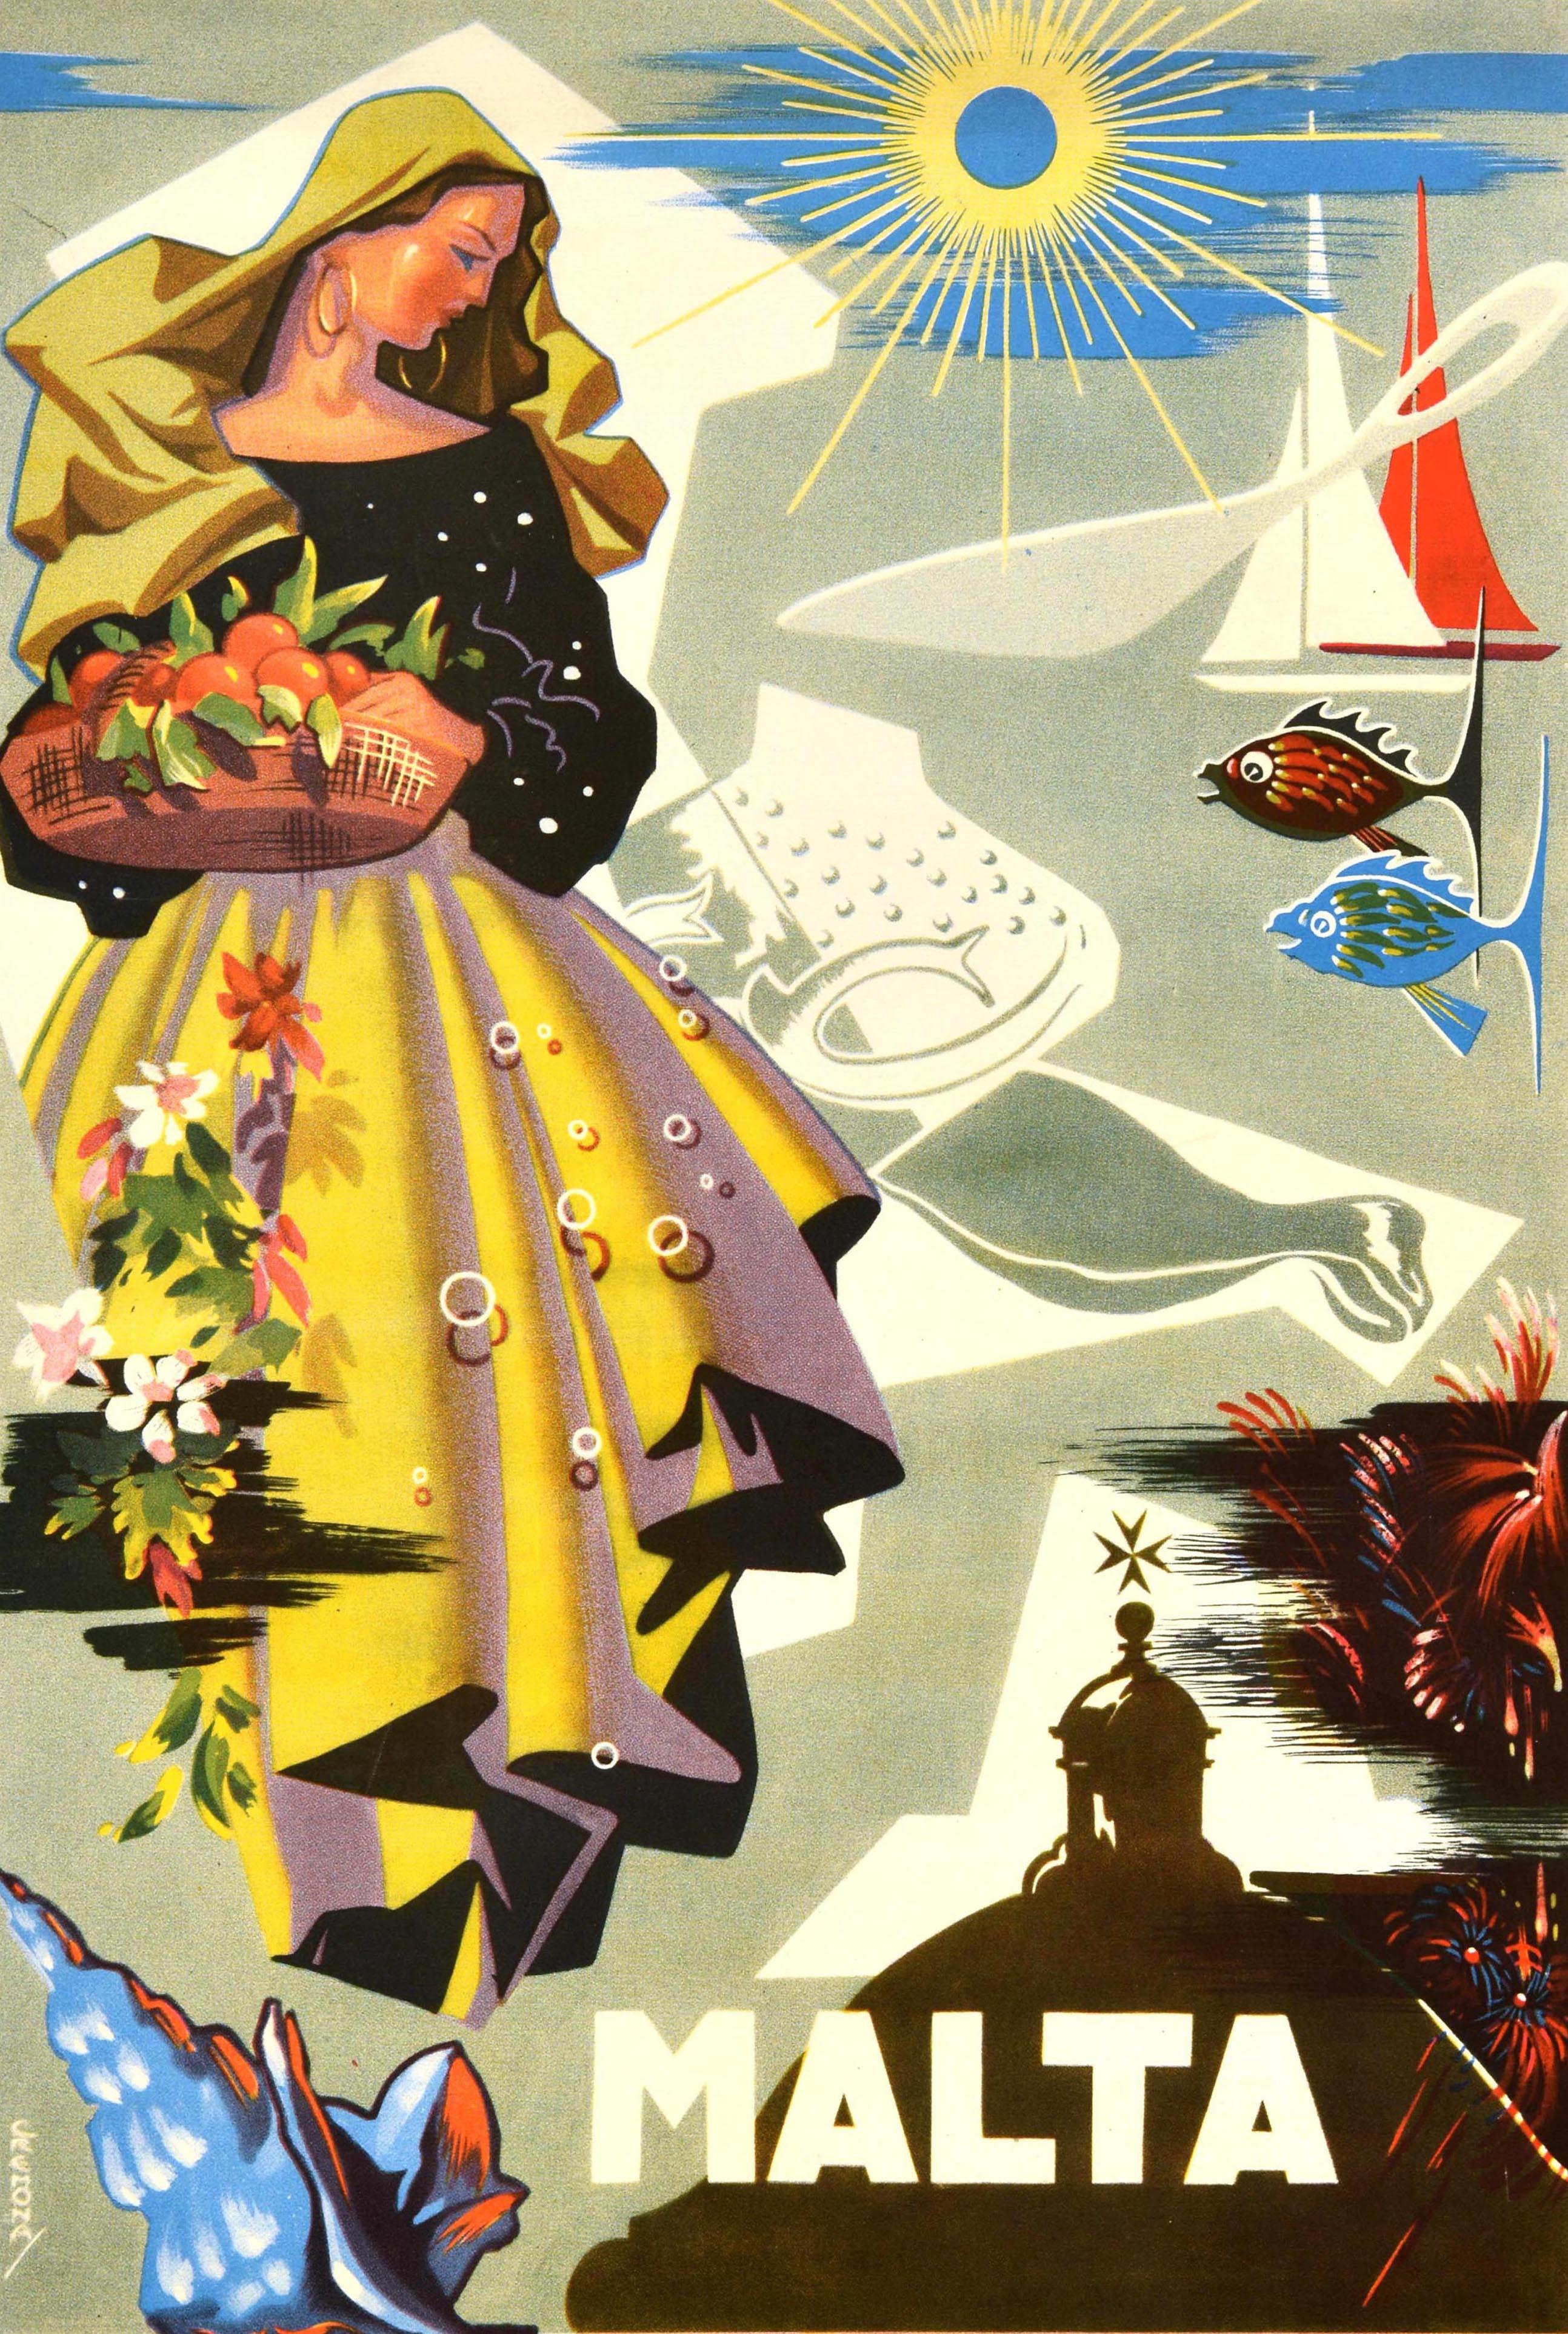 Original vintage travel poster for the island country of Malta located in the Mediterranean Sea featuring a colourful design with a lady wearing a traditional dress and head shawl holding a basket of oranges in front of a shining yellow sun and